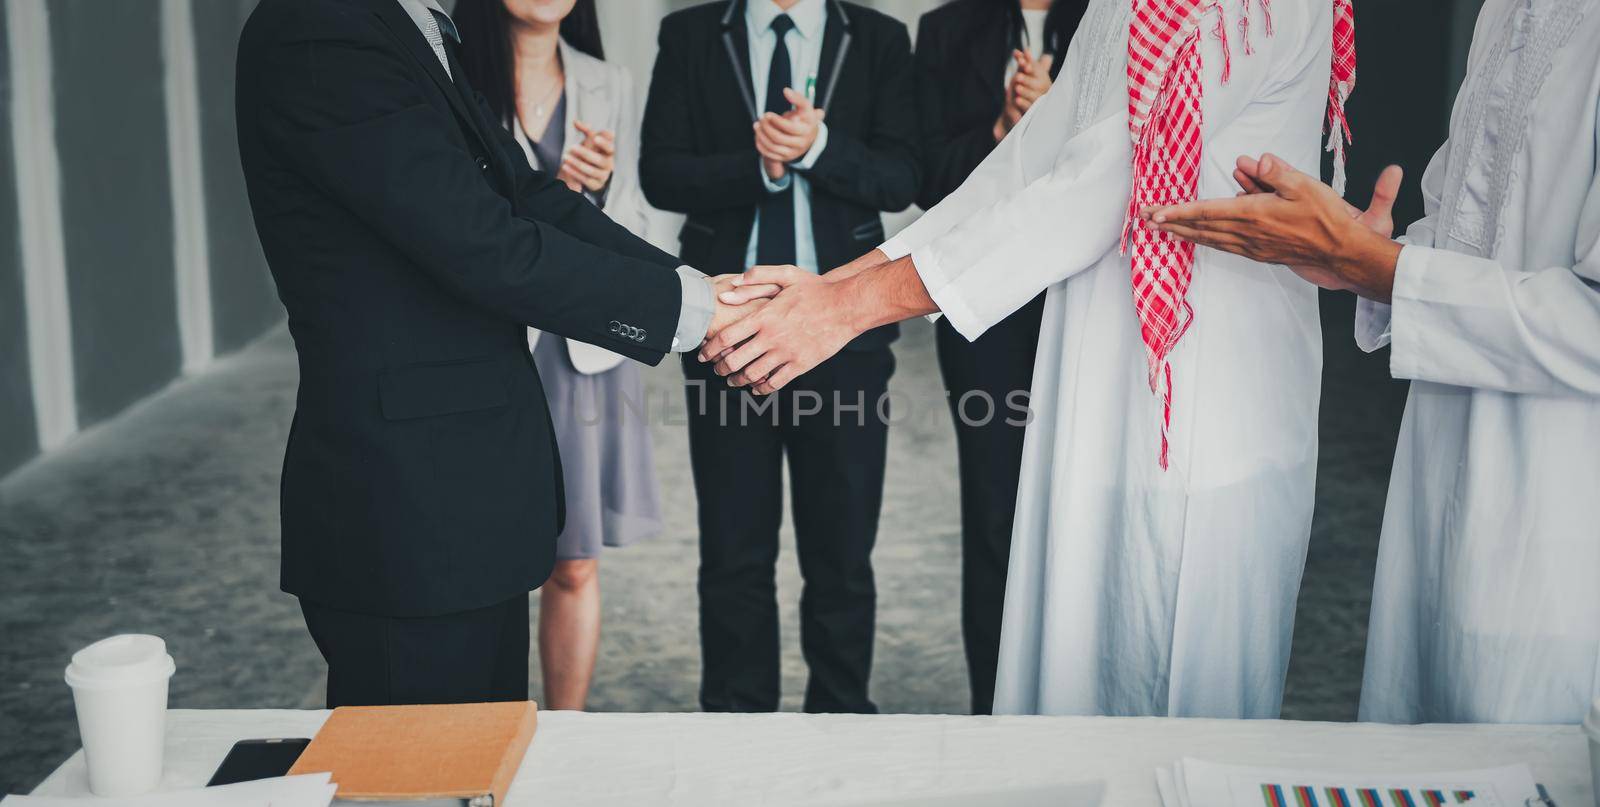 Business Partners Greetings Handshake After Conference Agreement Deal Together, Businesspeople Multicultural are Shaking Hands Togetherness in Meeting Room., Business Partnership Team Concept.